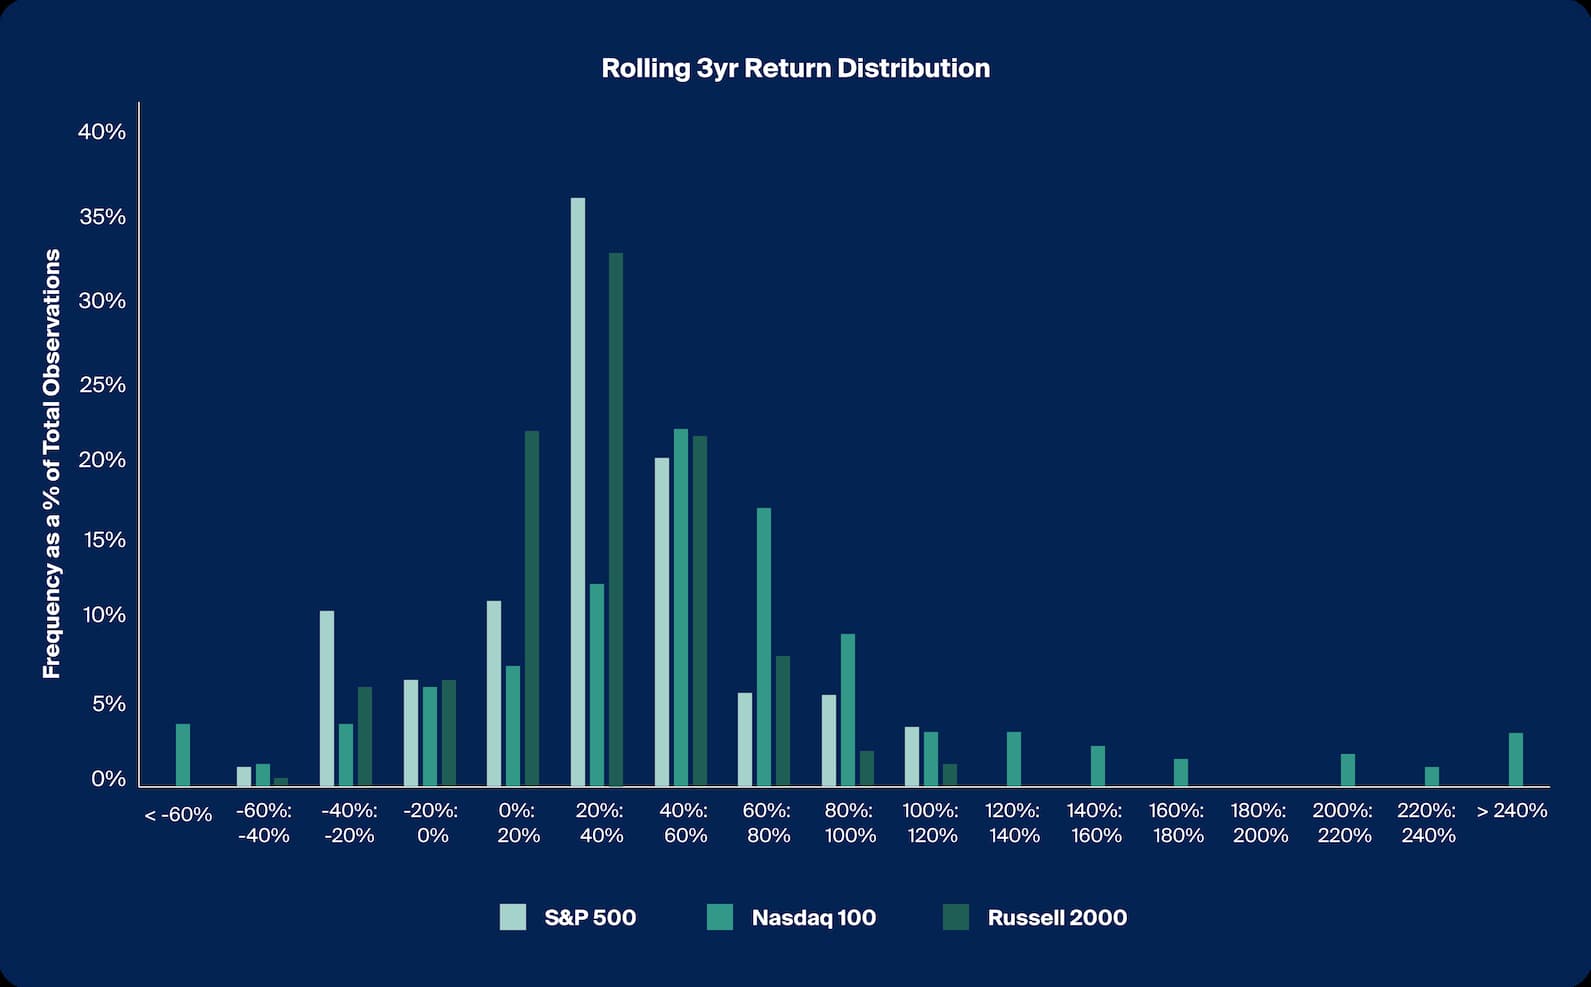 Common equity indices depict broad distributions of three-year returns, with fewer instances of negative total return (Exhibit 5)